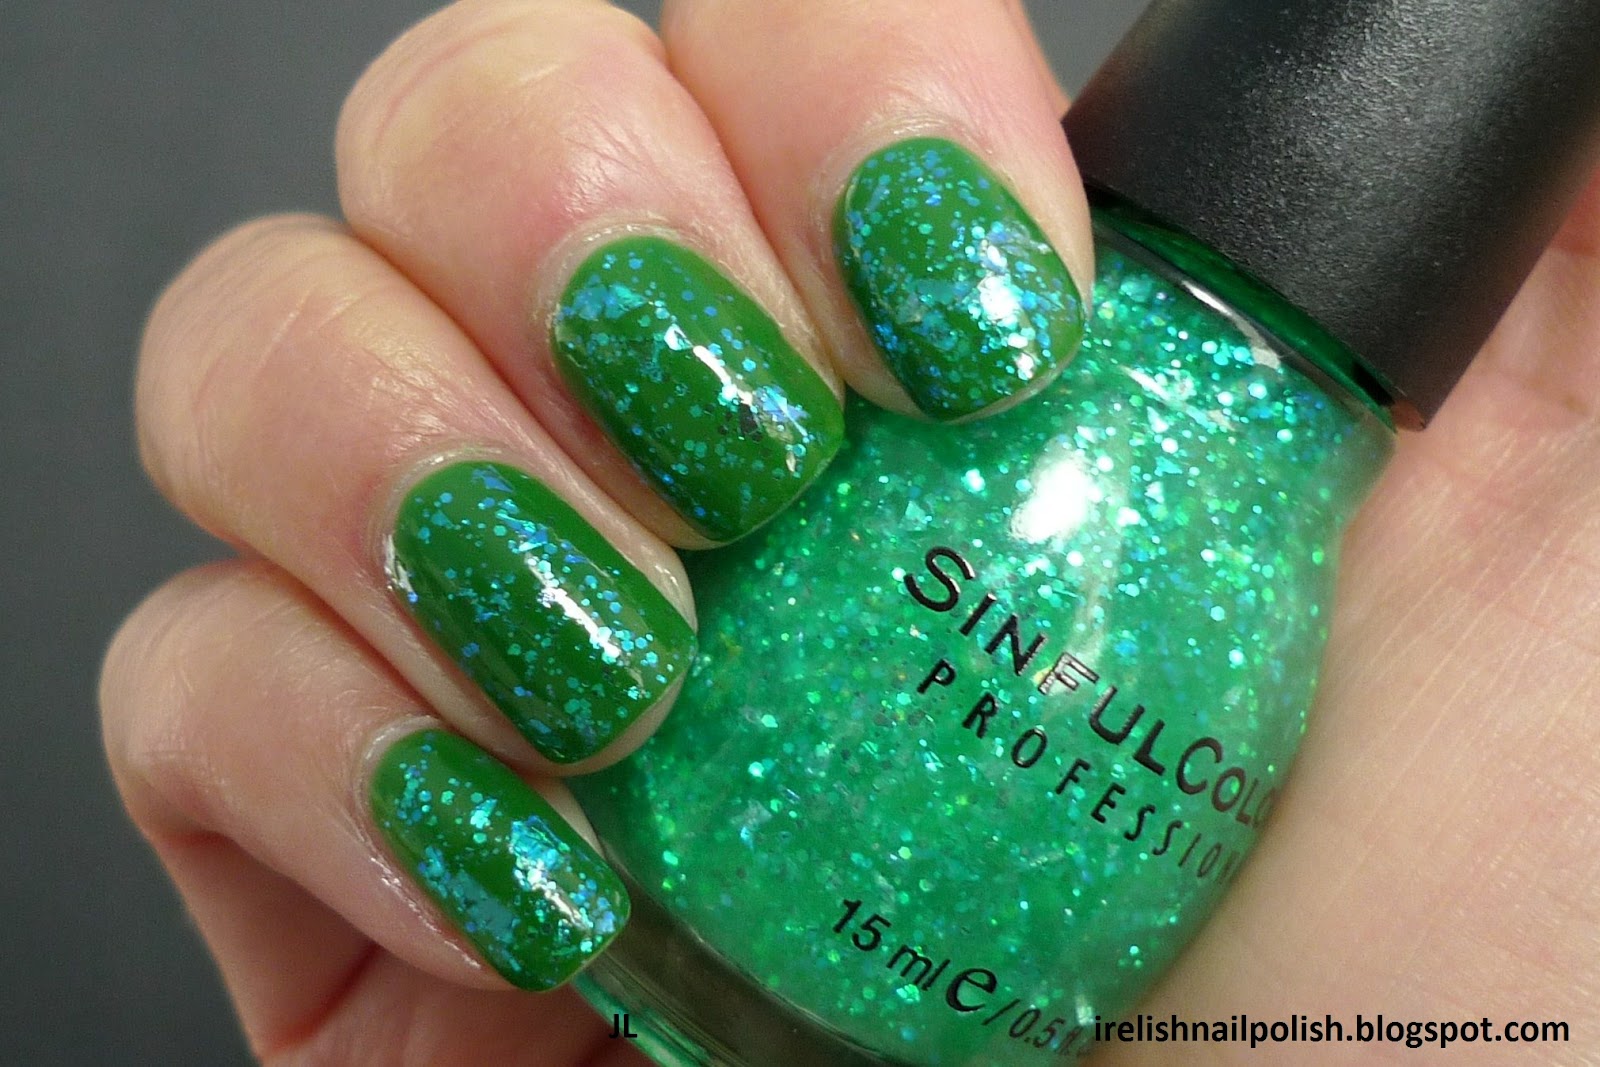 9. "Minted Emerald" nail polish by Sinful Colors - wide 8